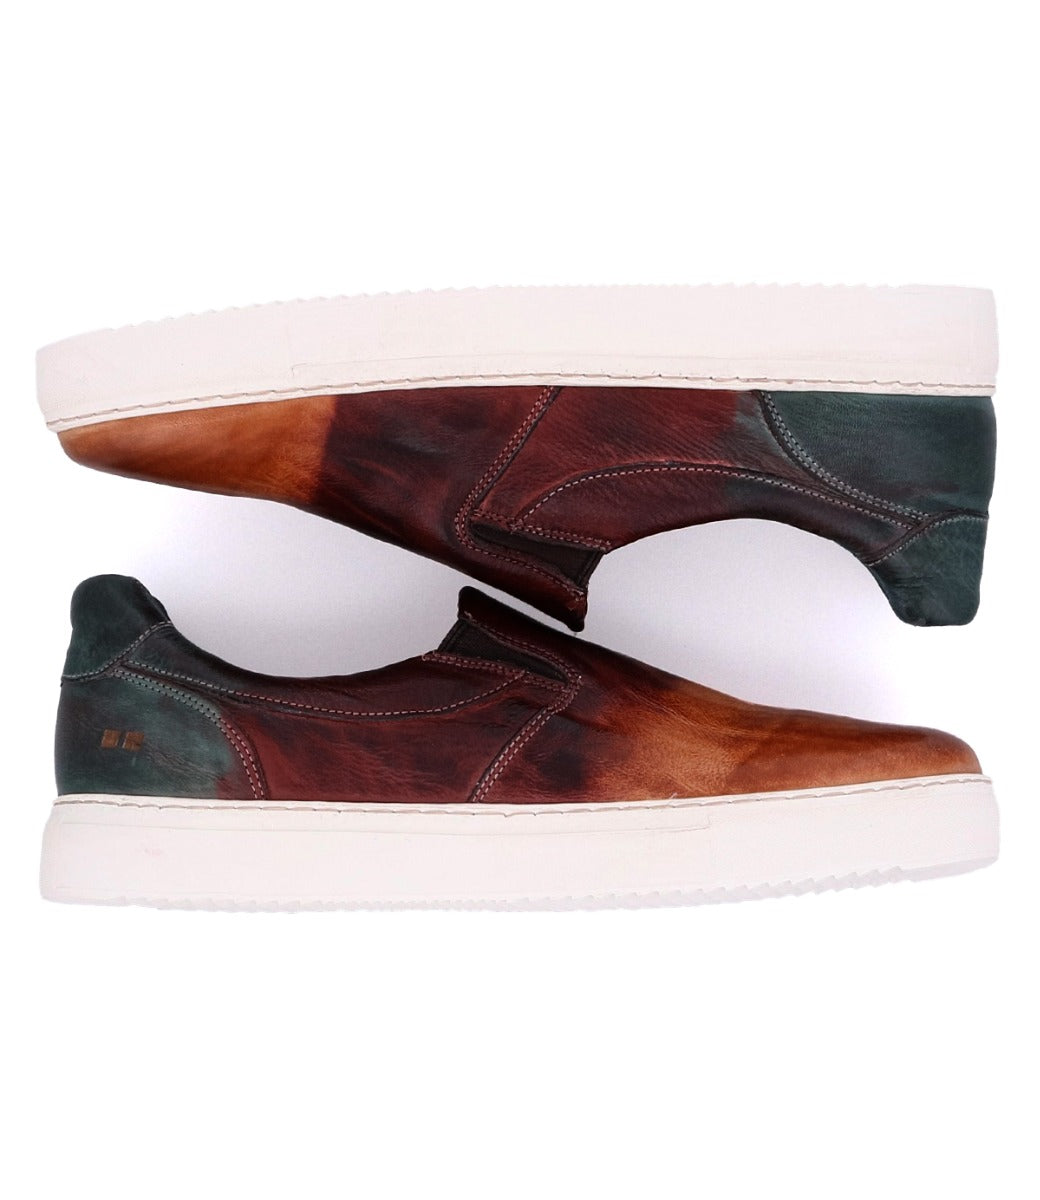 A pair of brown and green Harry slip on sneakers by Bed Stu.